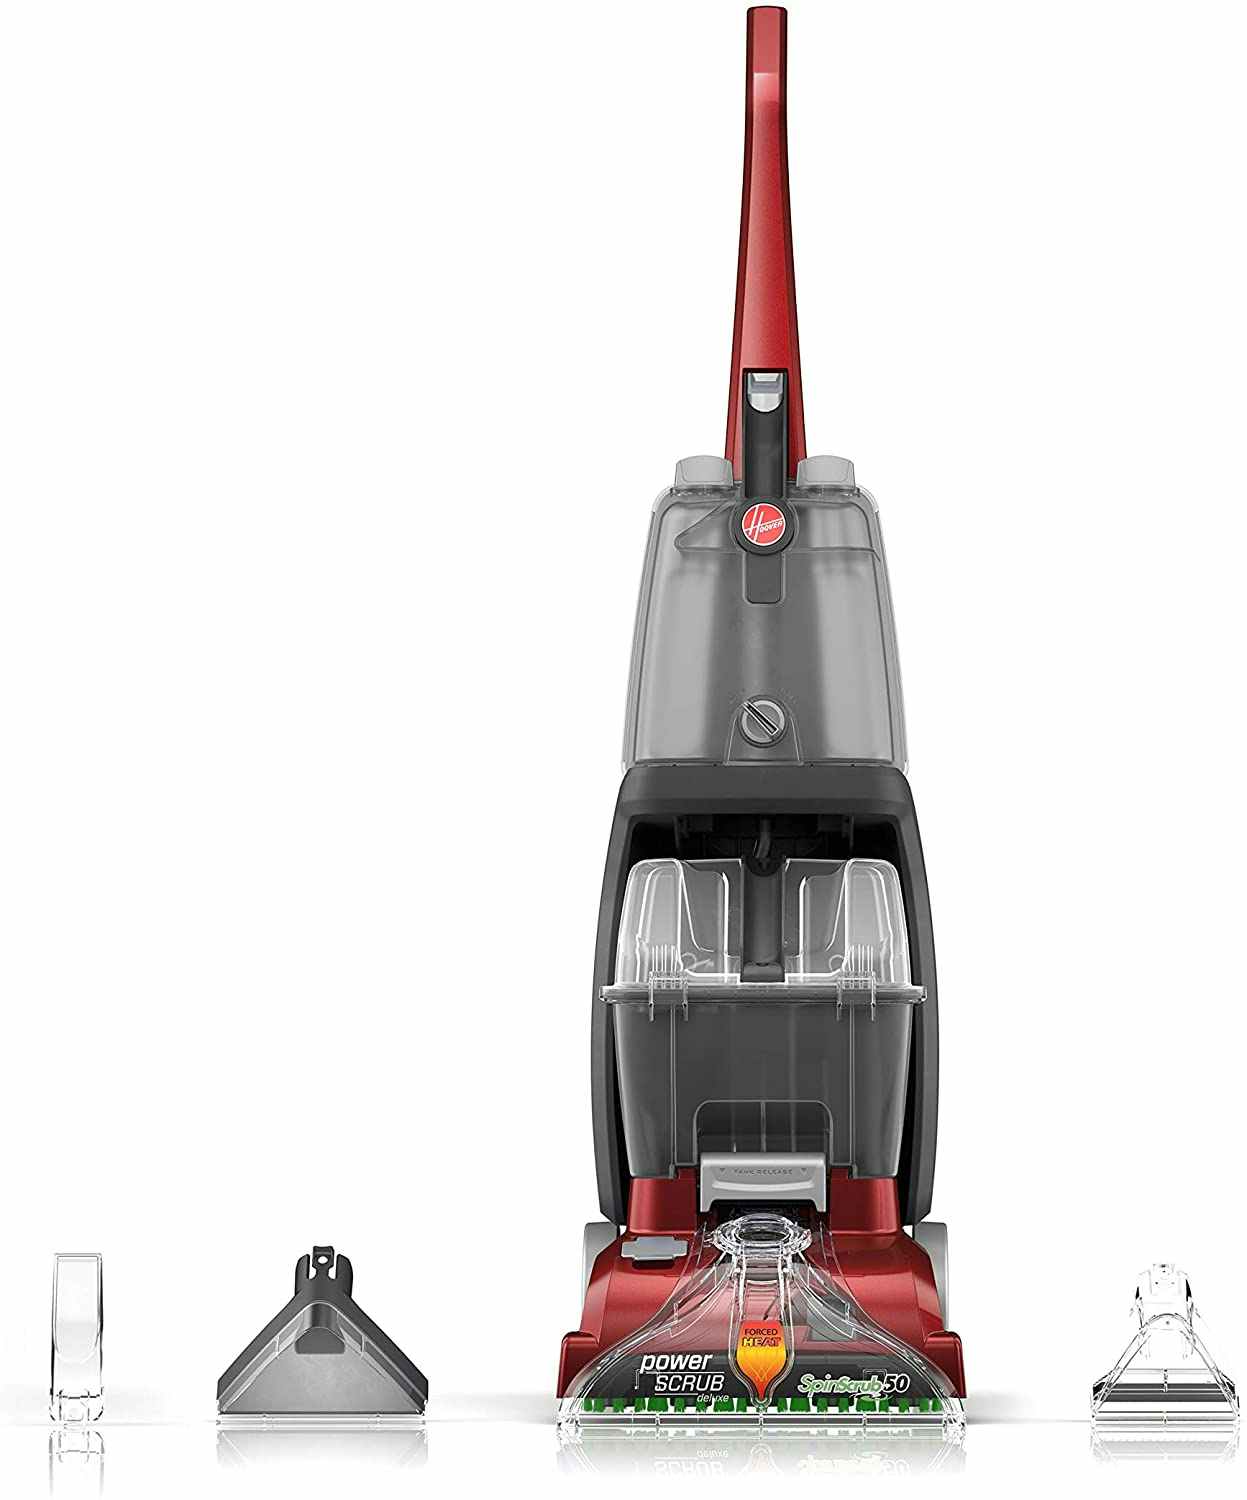 A red Hoover carpet cleaner with accessories placed to the side